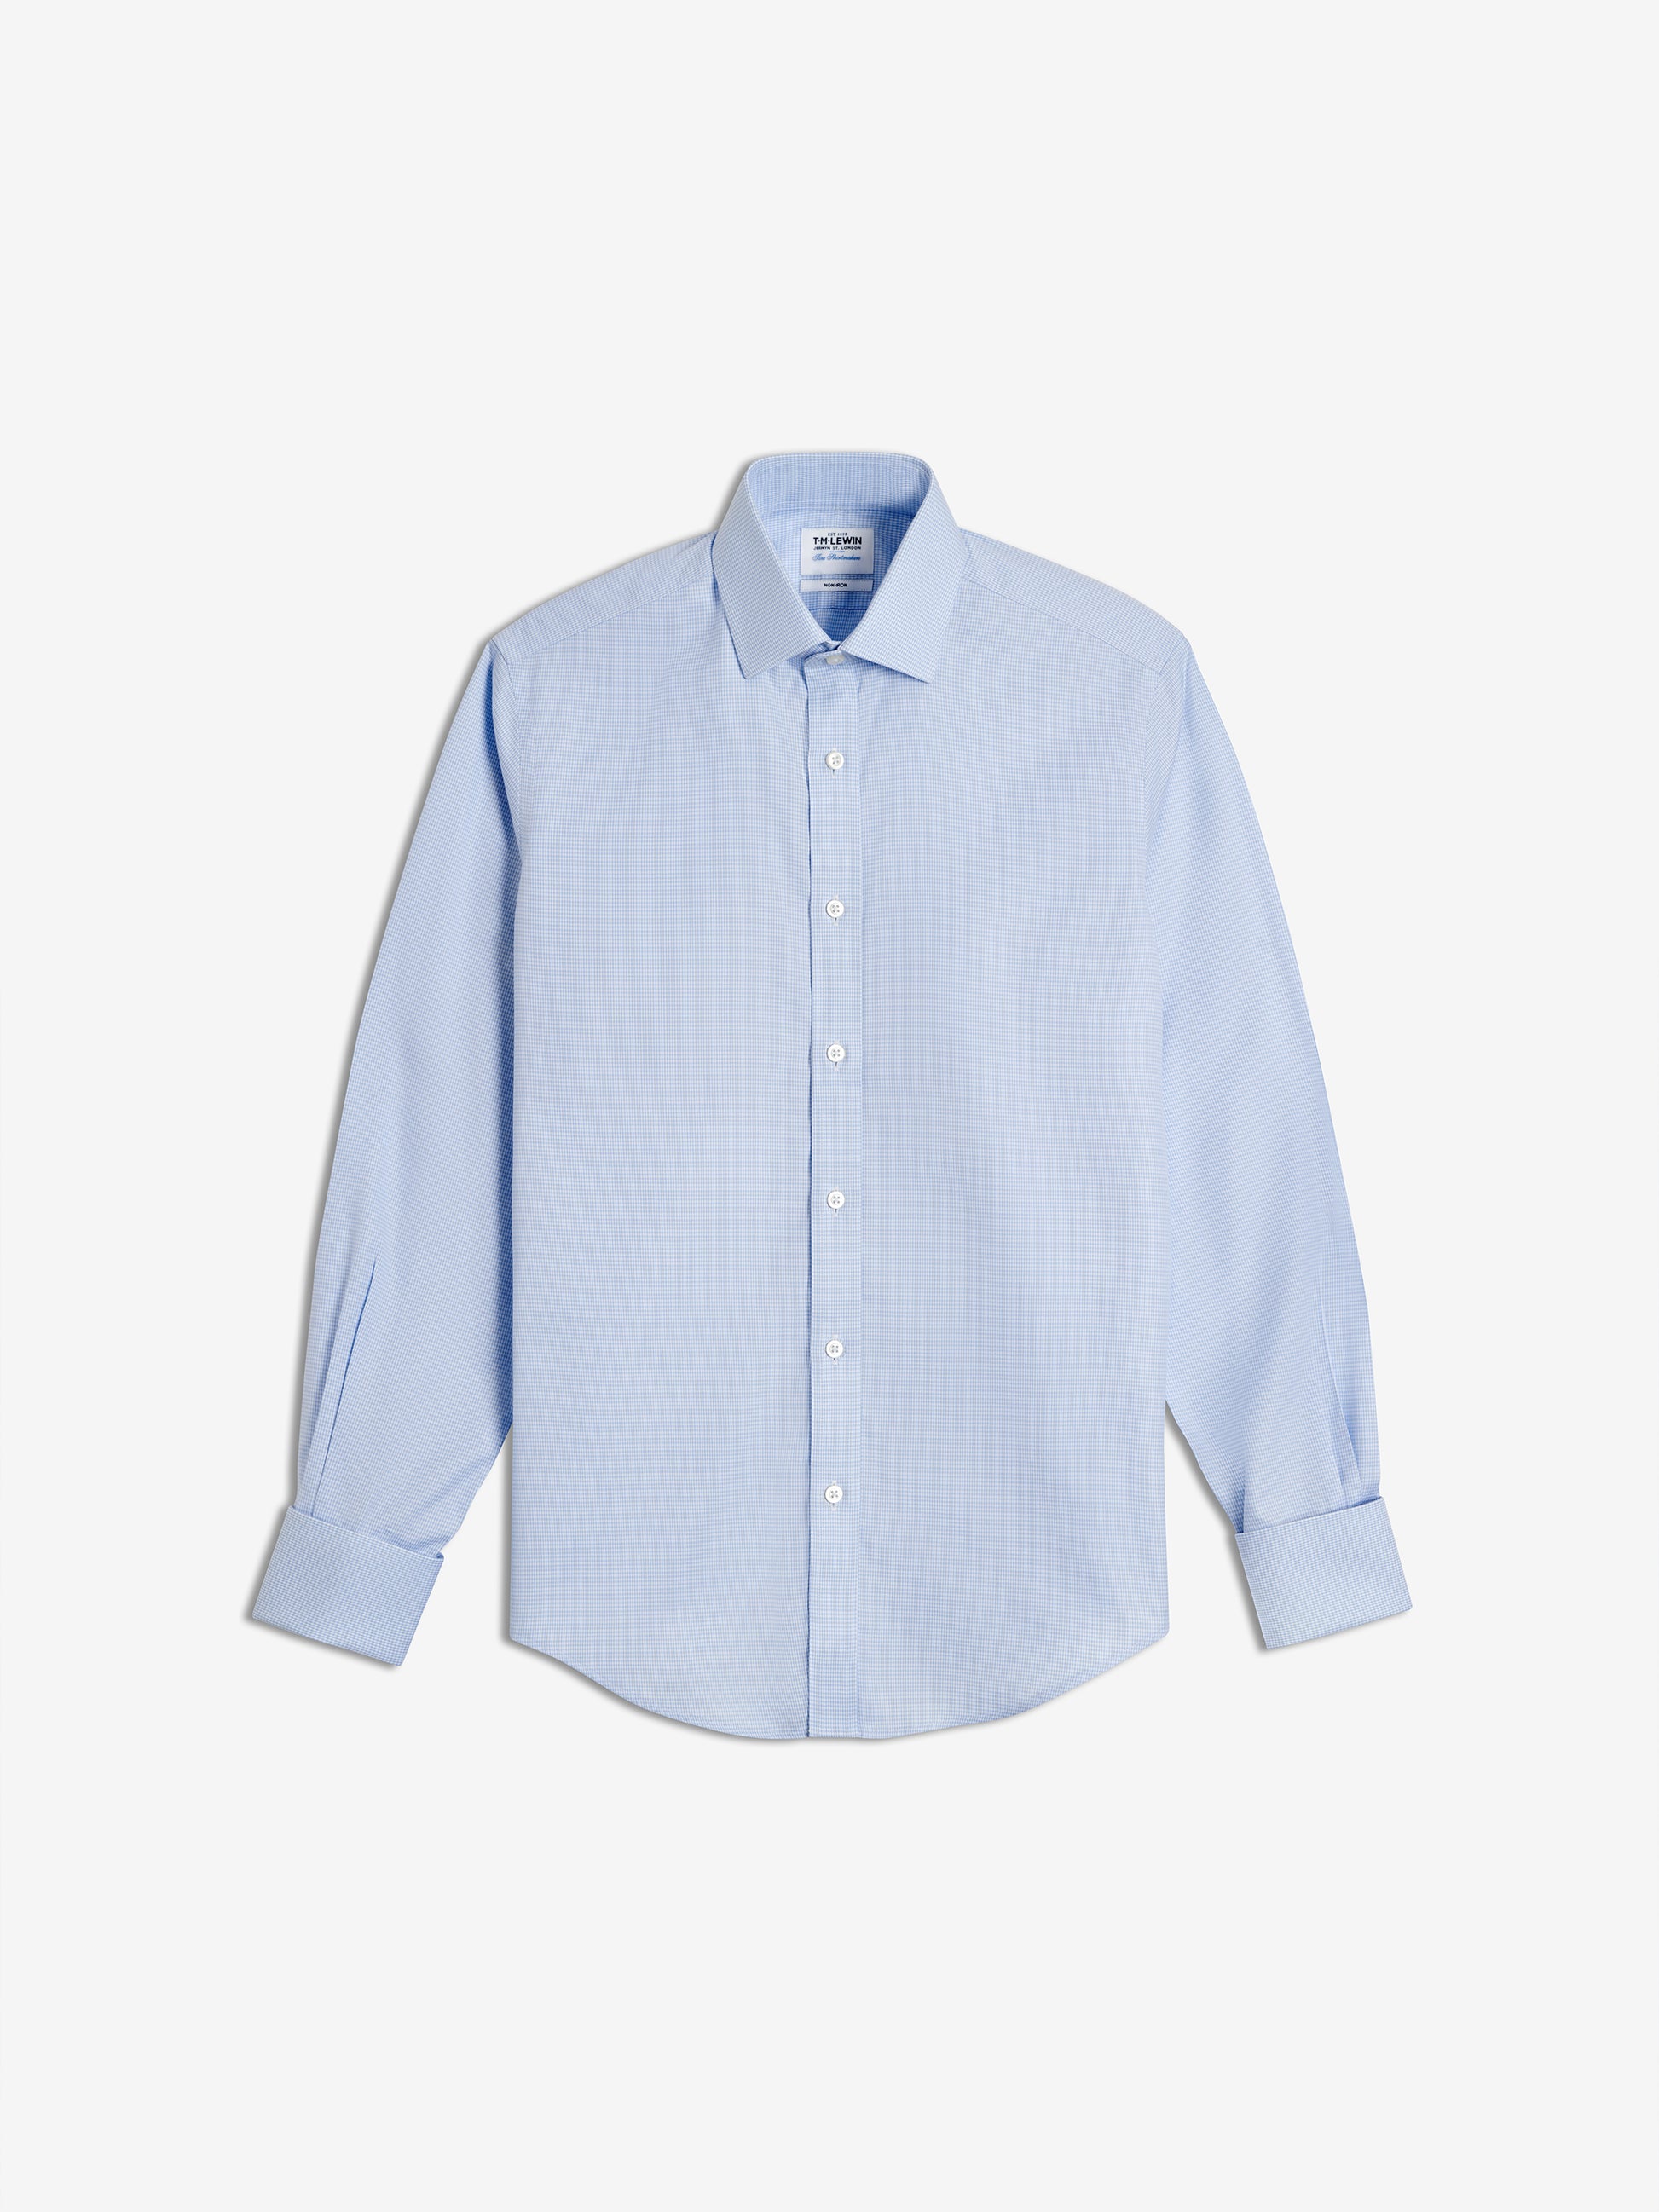 Image 7 of Non-Iron Light Blue Dogtooth Twill Slim Fit Double Cuff Classic Collar Shirt